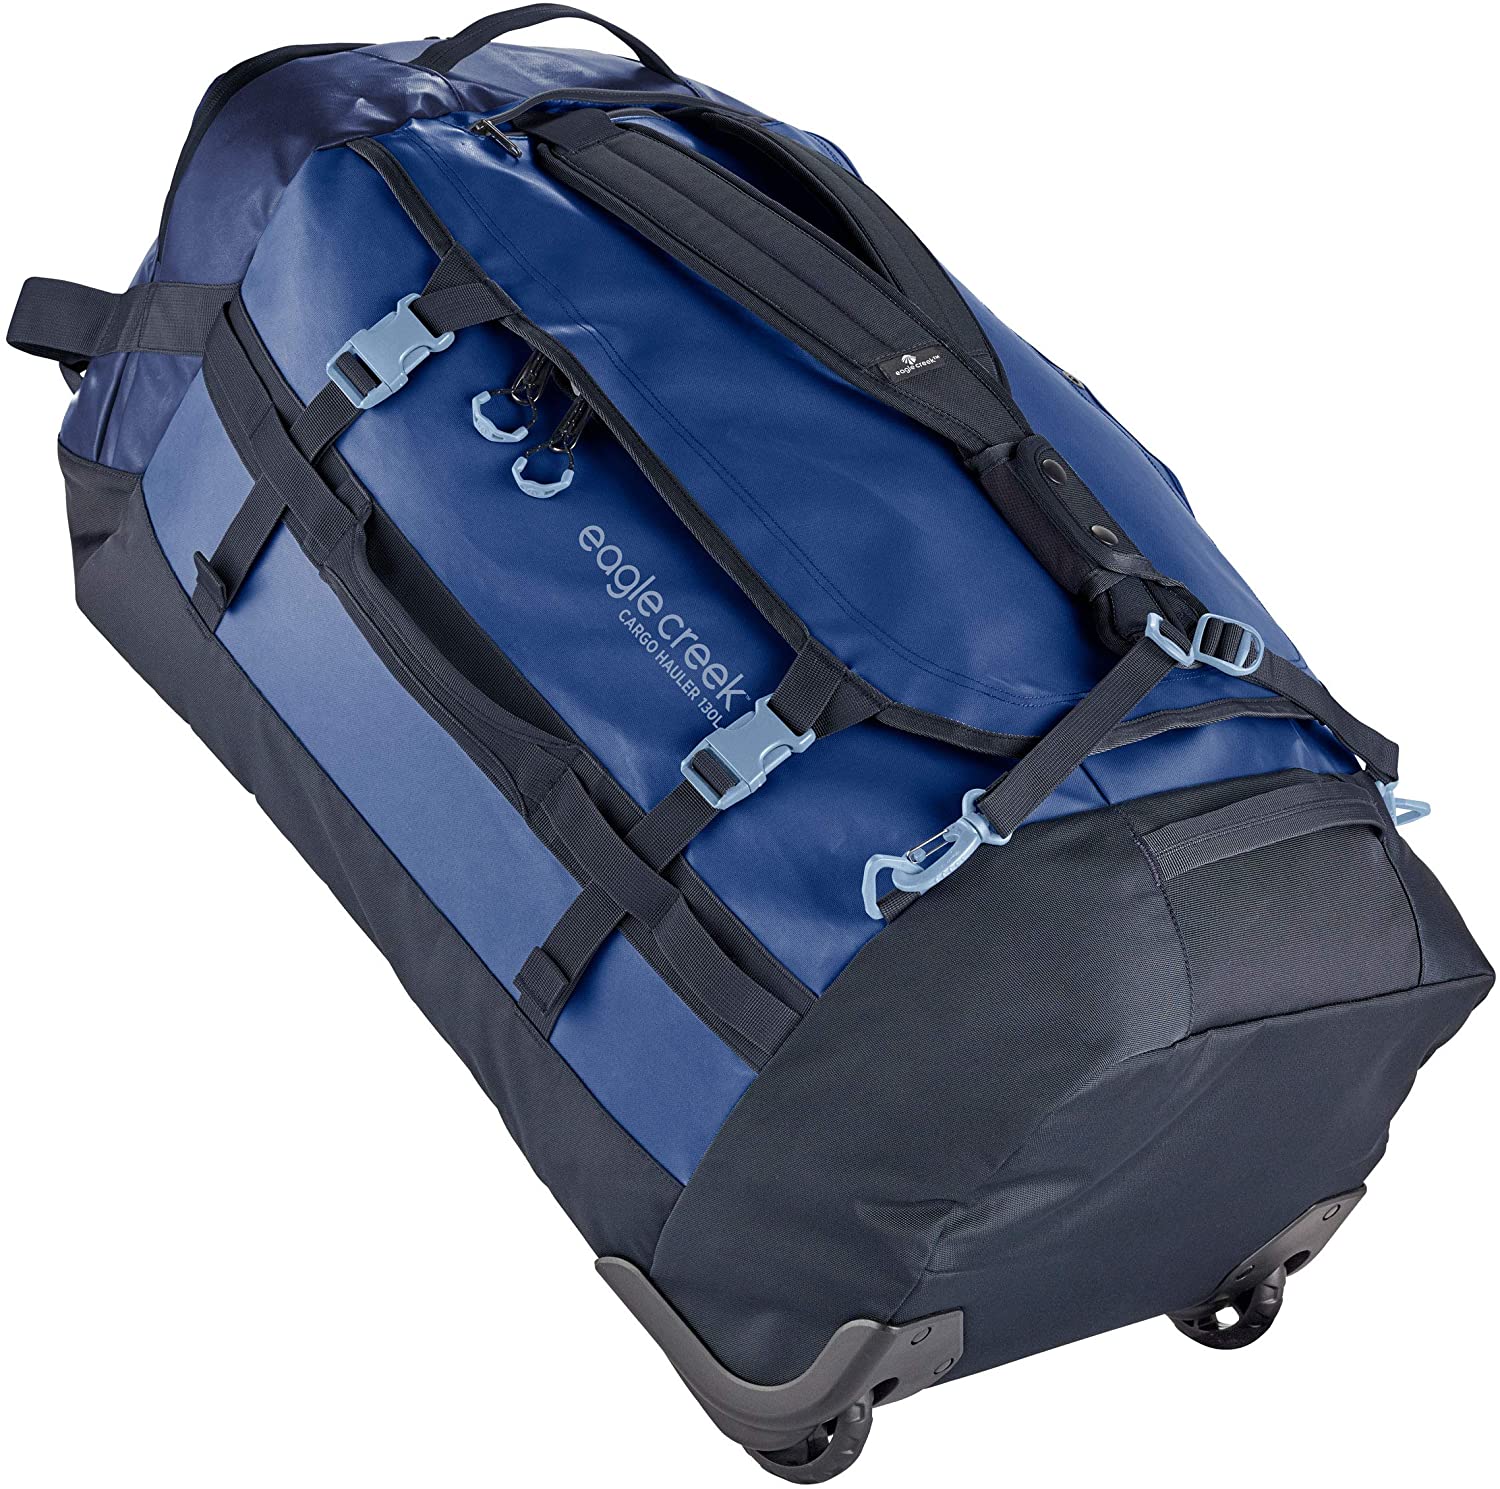 Eagle Creek Cargo Hauler Wheeled Duffel 130L in Arctic Blue color from the front